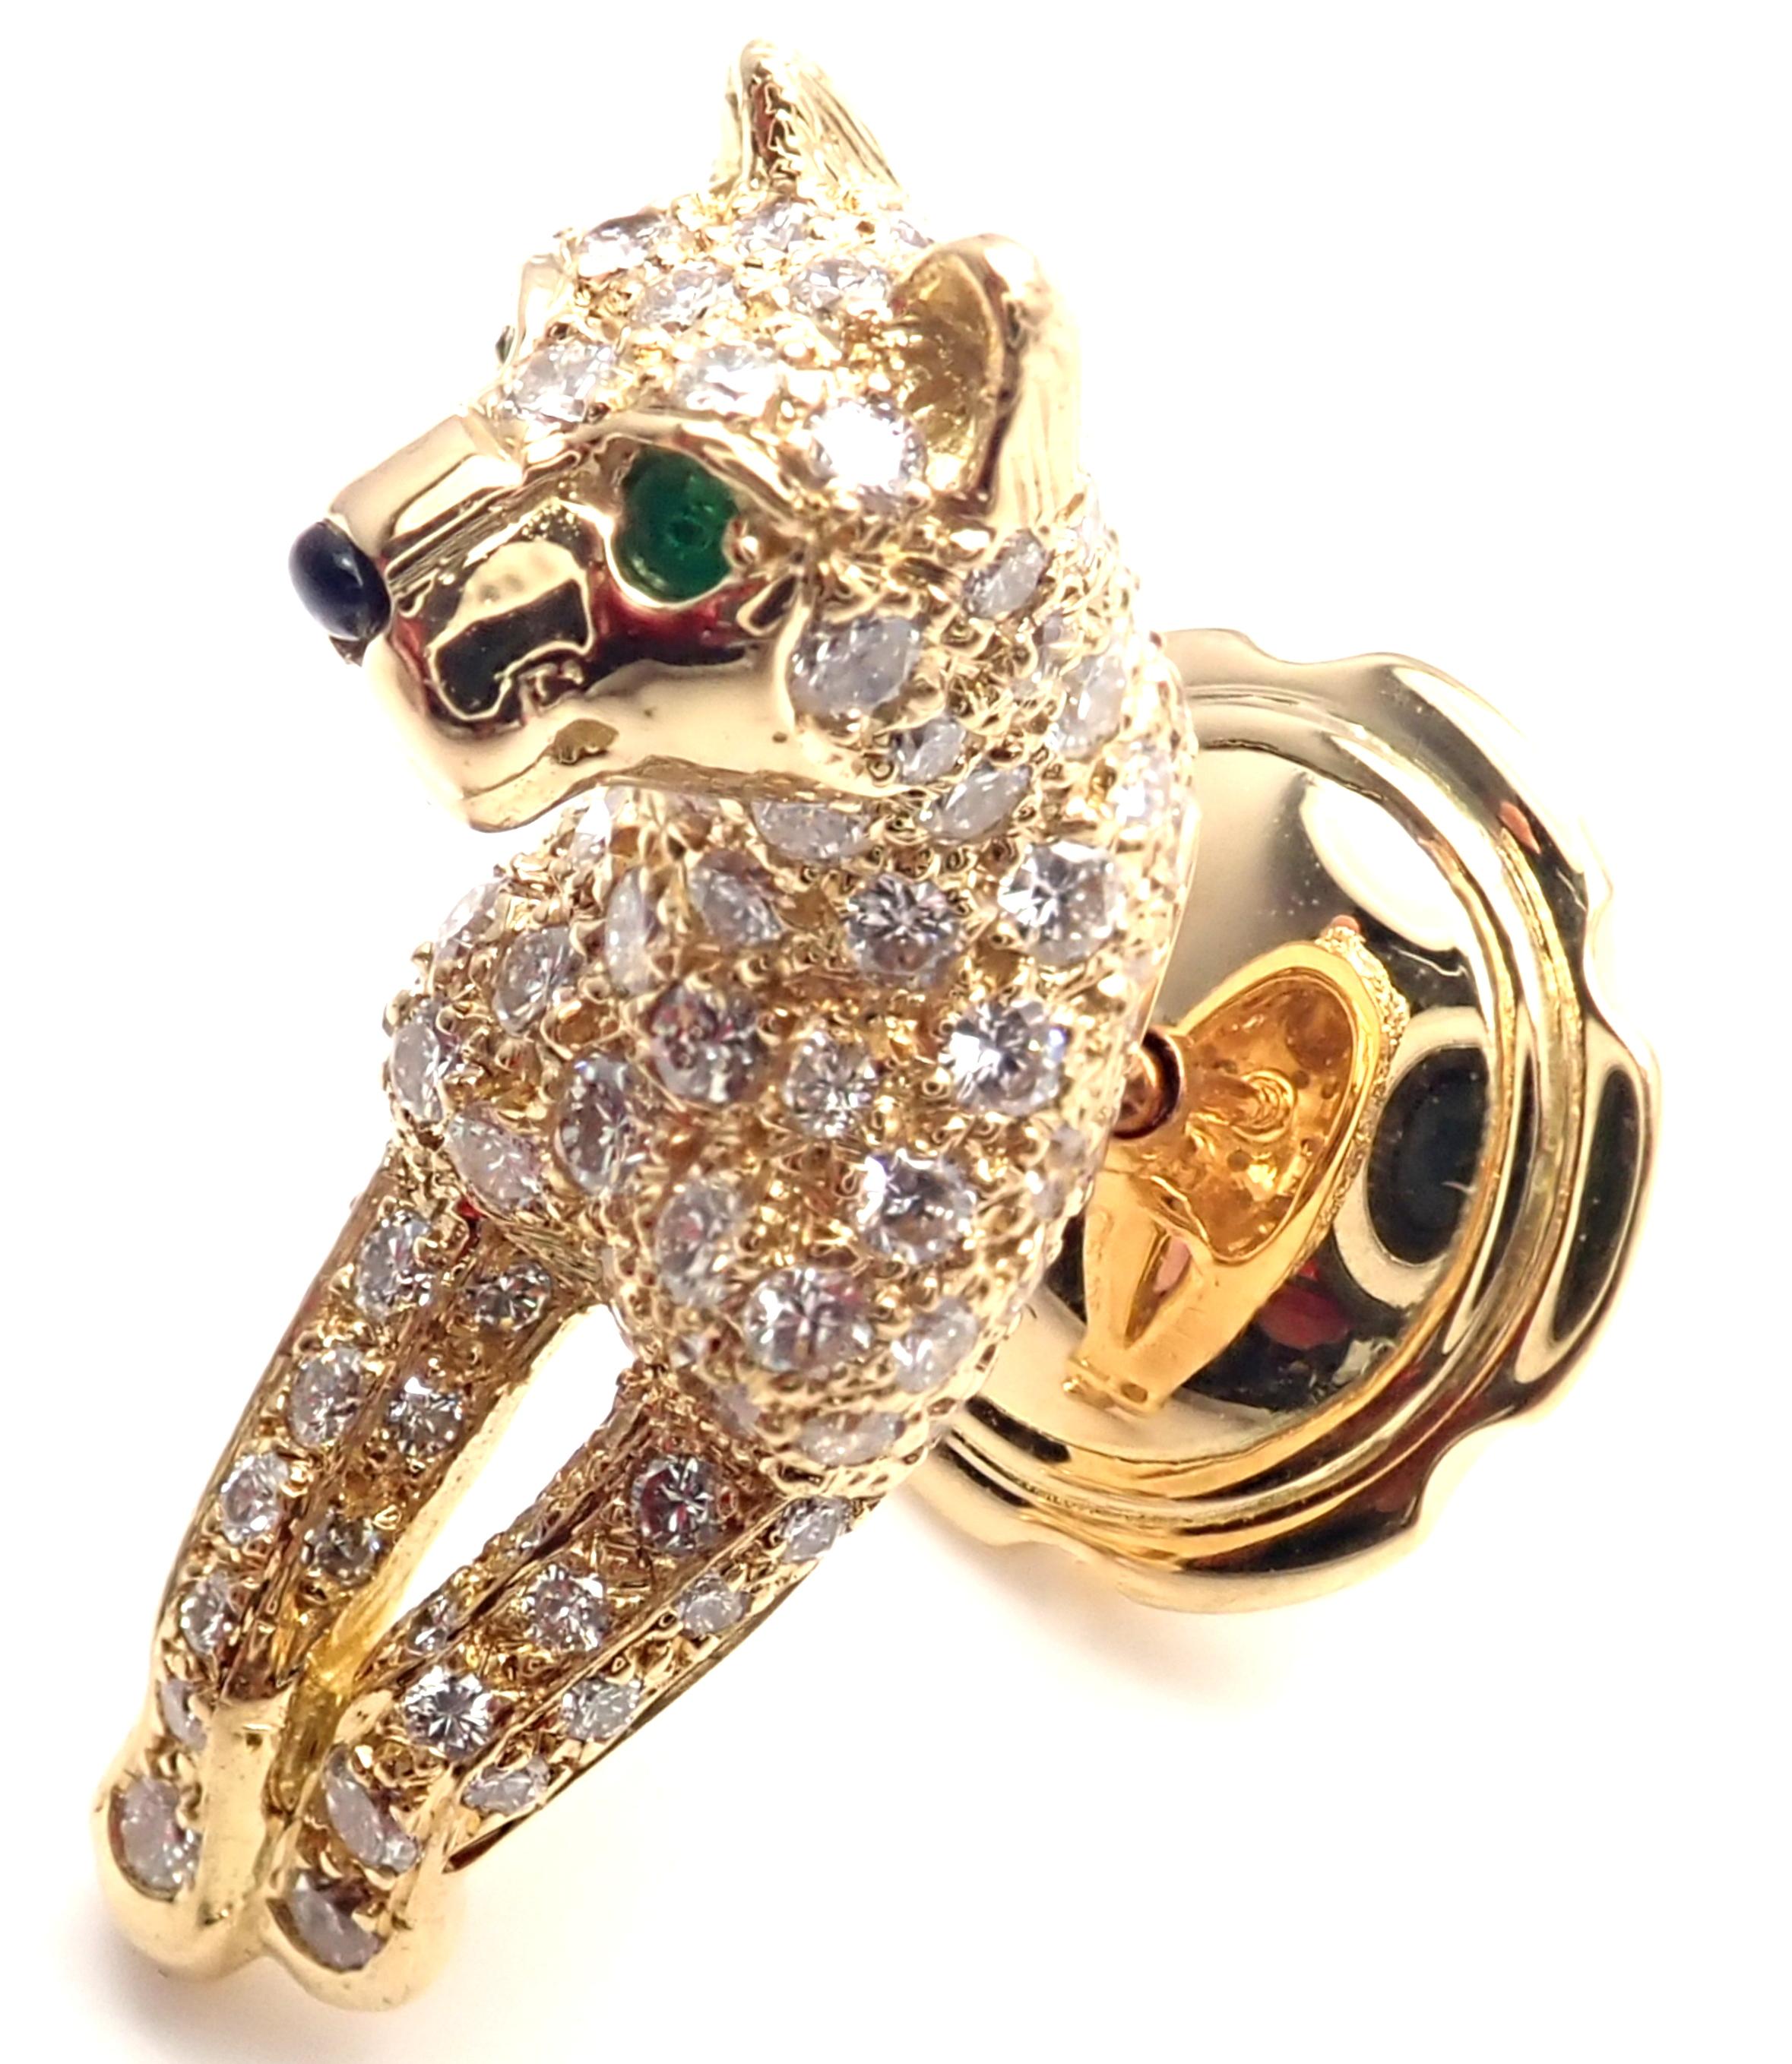 18k Yellow Gold Diamond, Emerald Black Onyx nose Panther Tie Lapel Pin by Cartier. 
With Round brilliant cut diamonds VVS1 clarity, E color 2 small emeralds 1 small onyx 
This pin comes with Cartier box and Cartier service